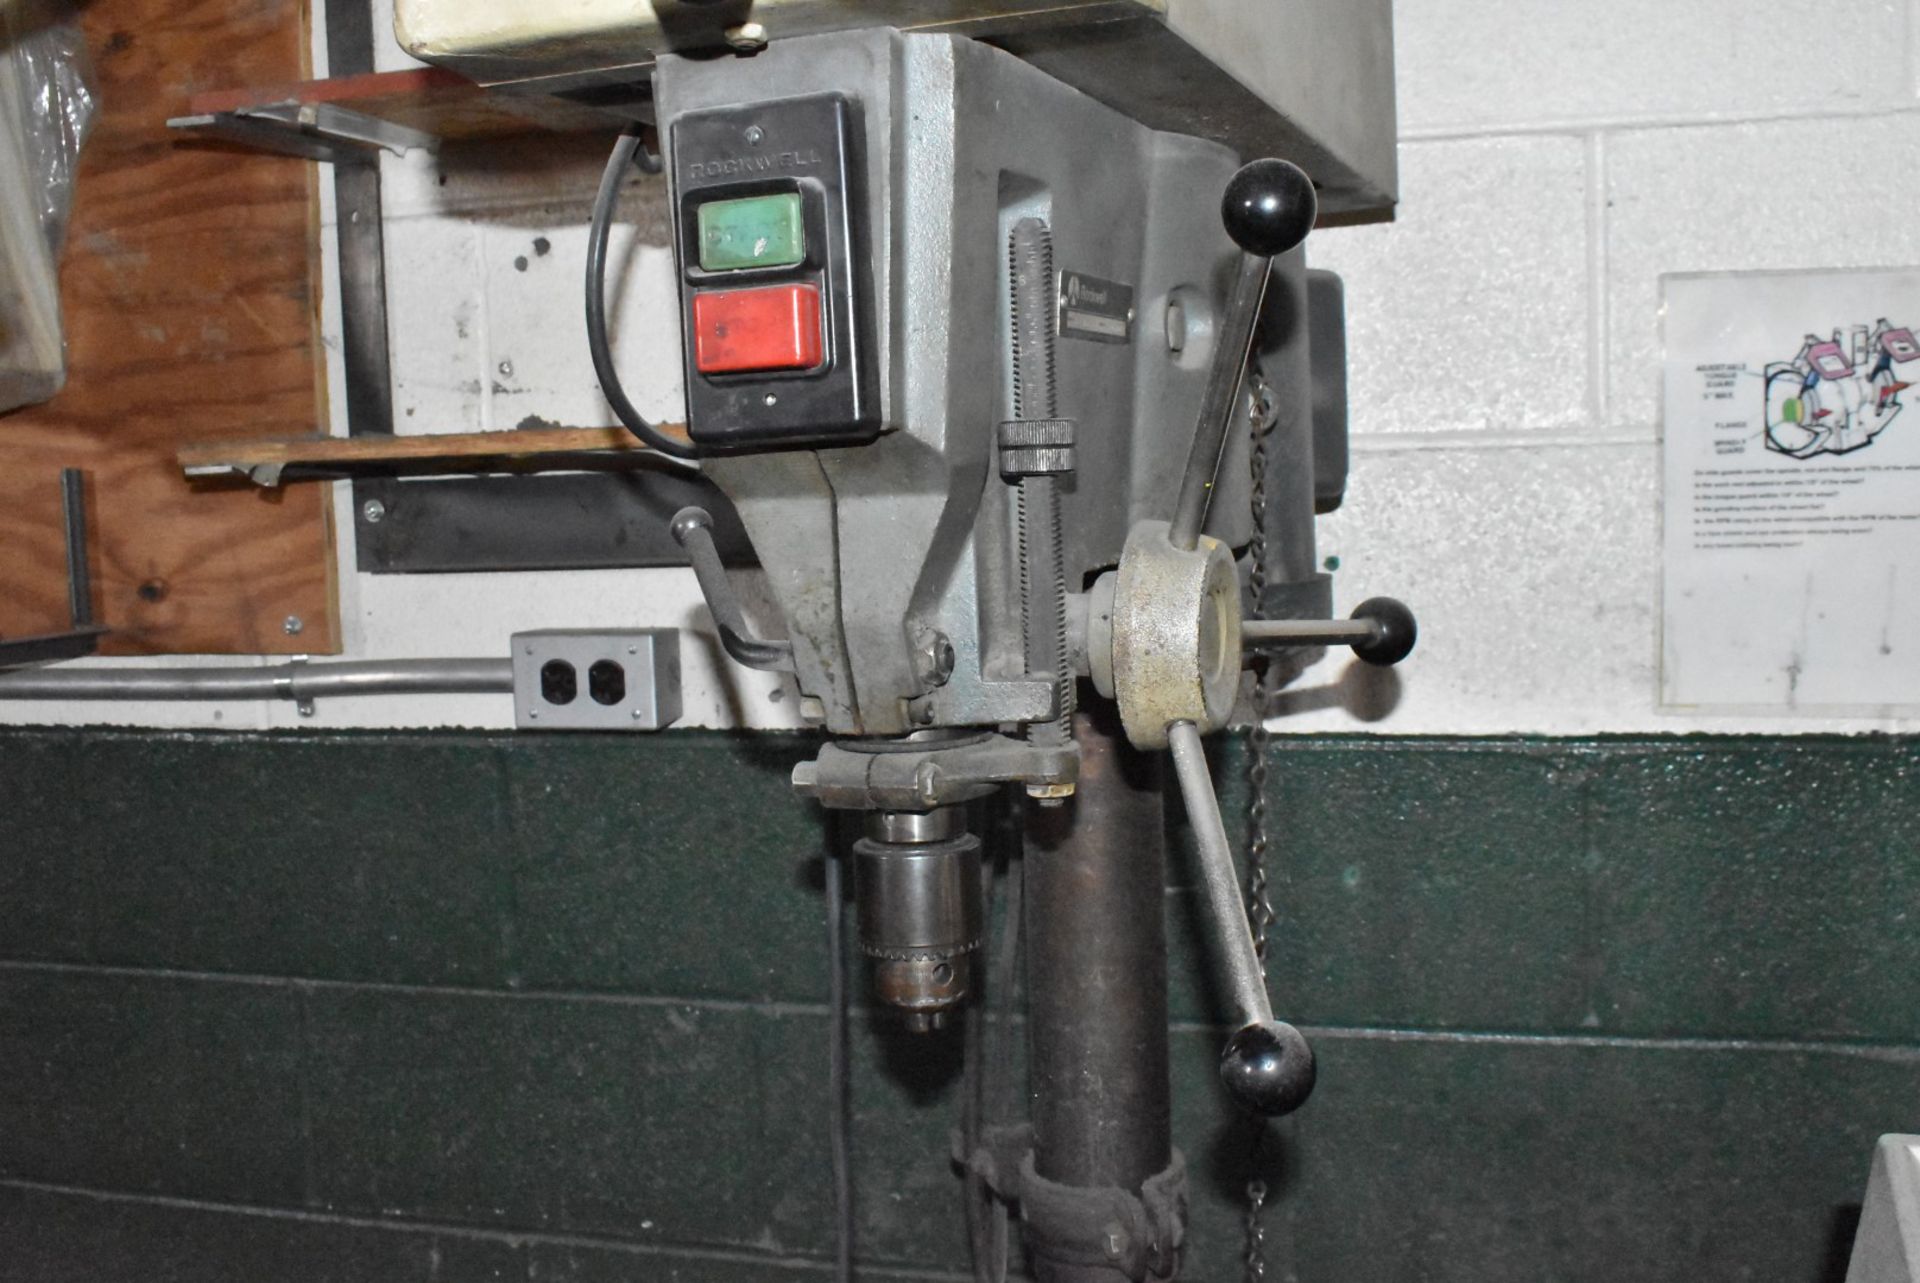 LOT/ ROCKWELL SERIES 15-655 HEAVY DUTY FLOOR TYPE DRILL PRESS WITH SPEEDS TO 3500 RPM, 1.5 HP - Image 4 of 8